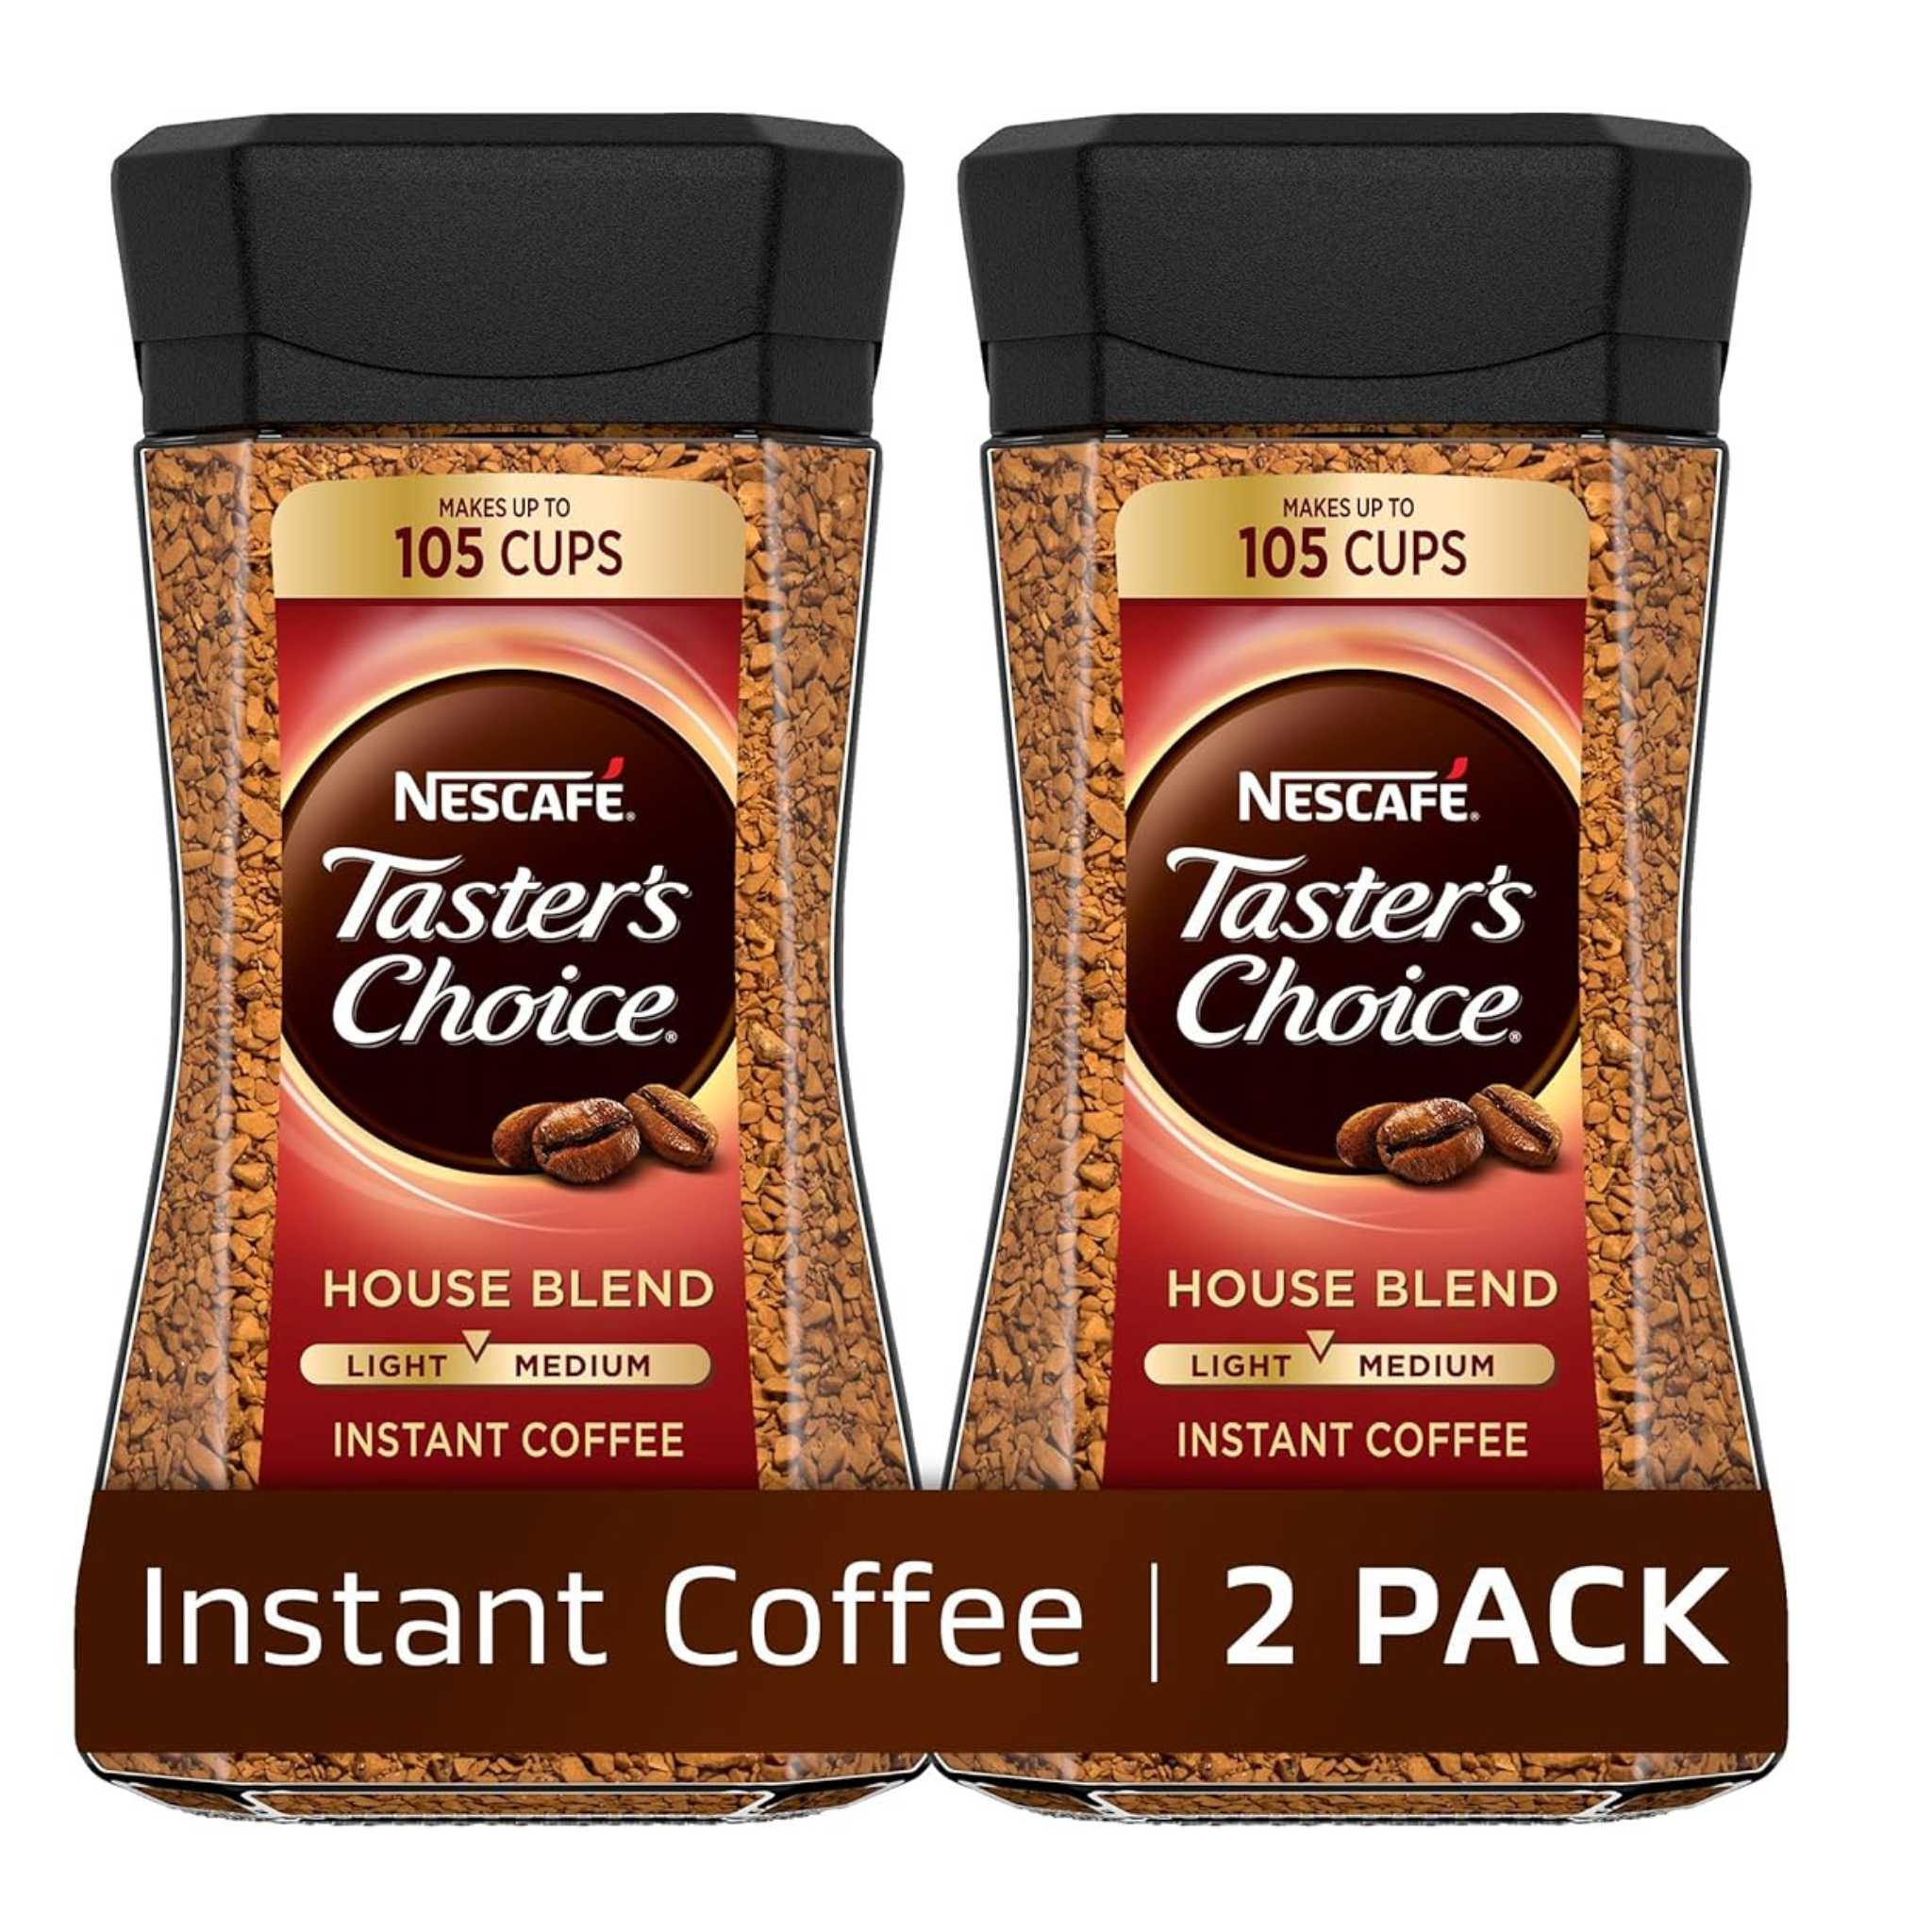 2 Nescafe Taster's Choice House Blend Instant Coffee (Copy)